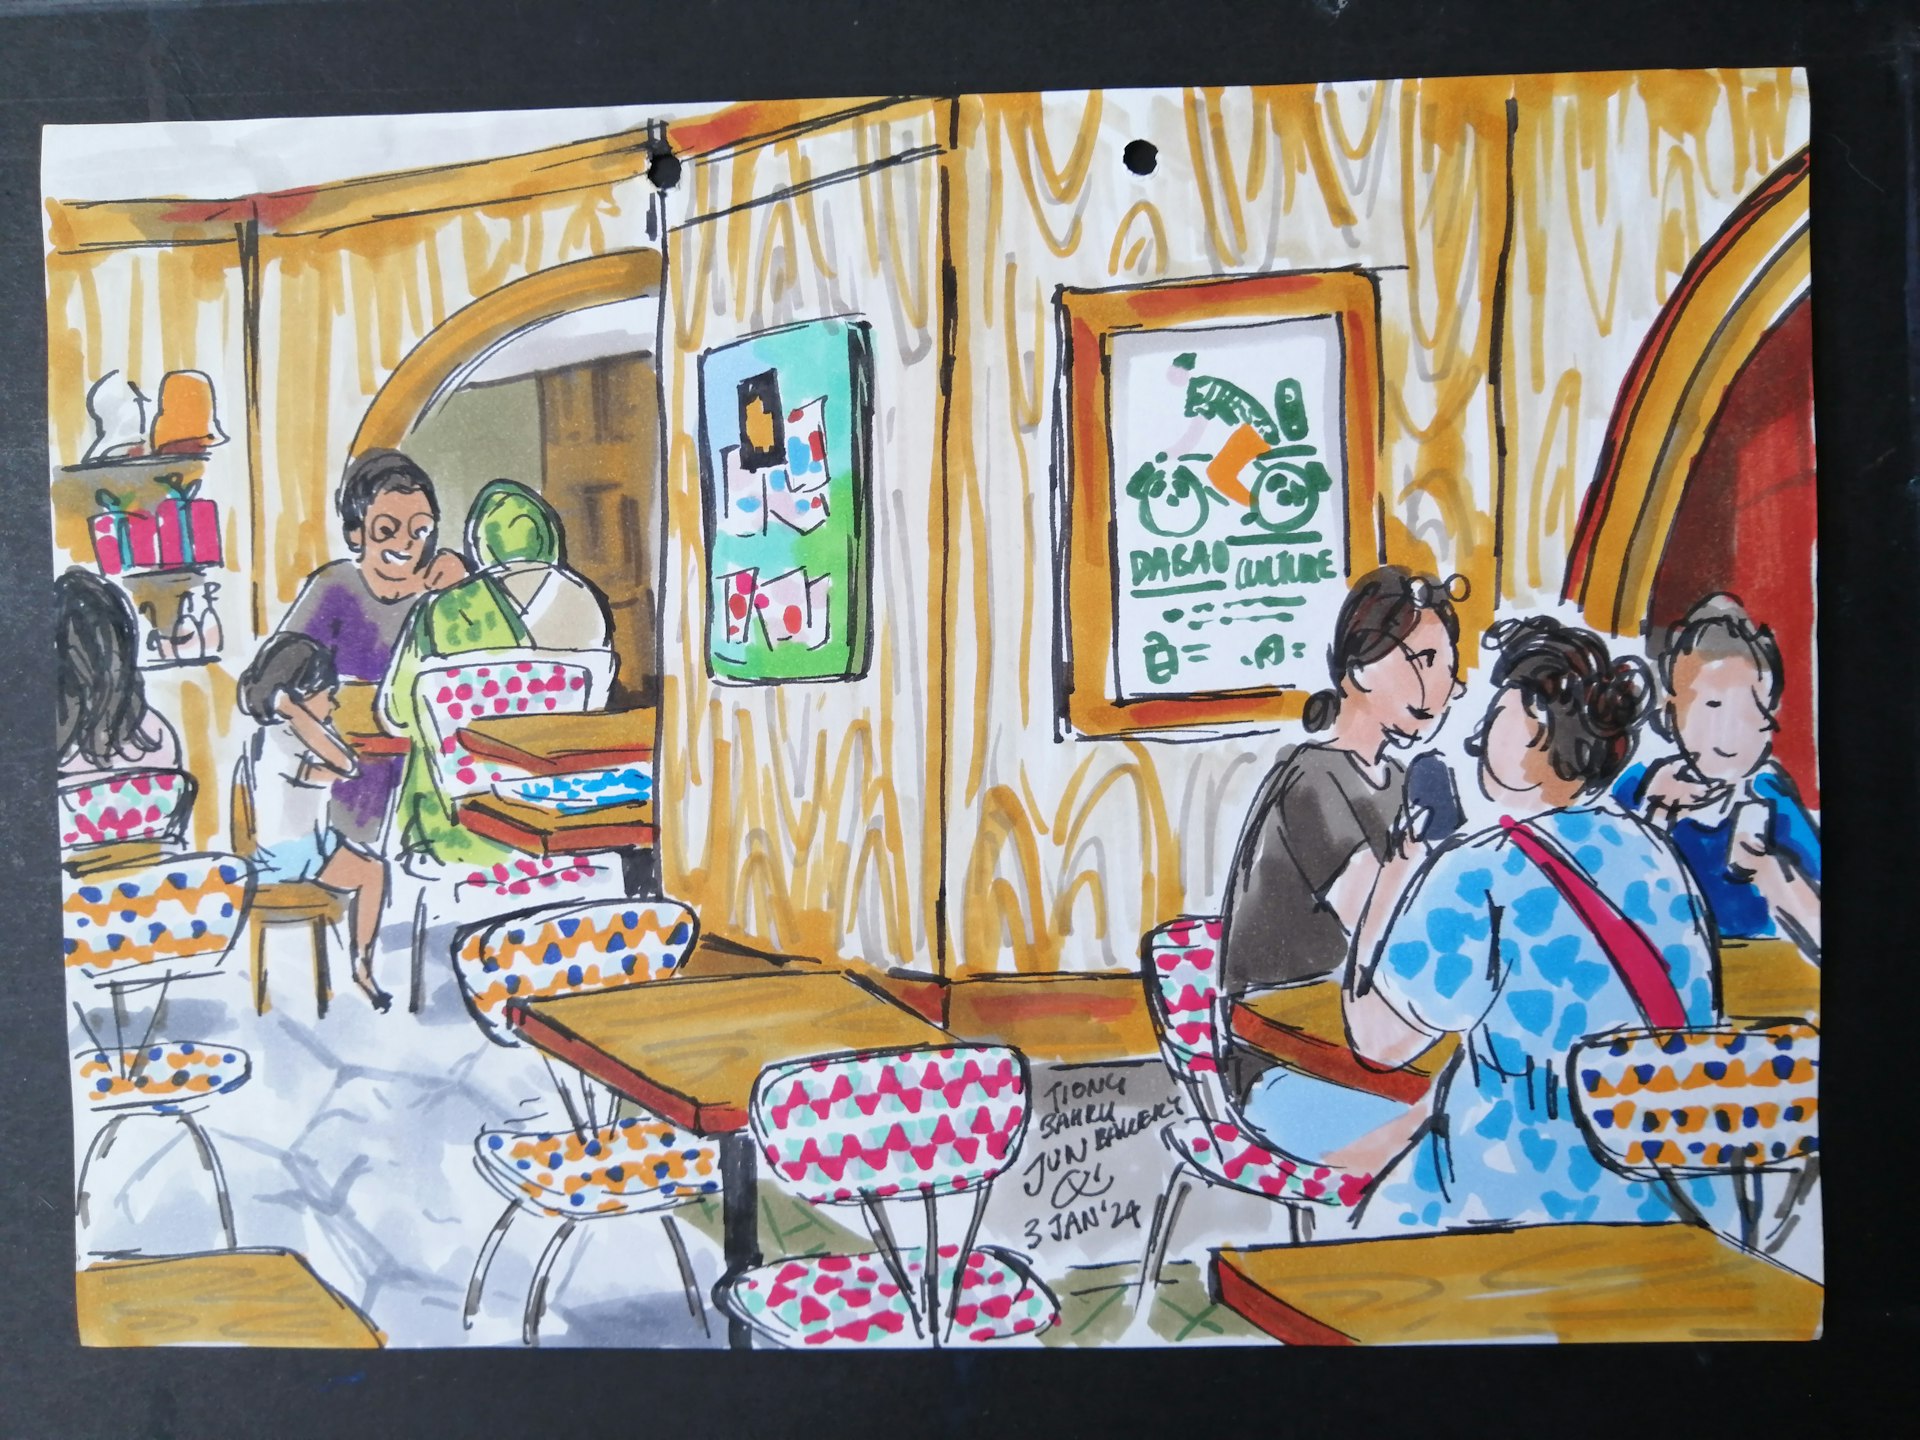 Sketch of the interior of Tiong Bahru Bakery in Plaza Sing